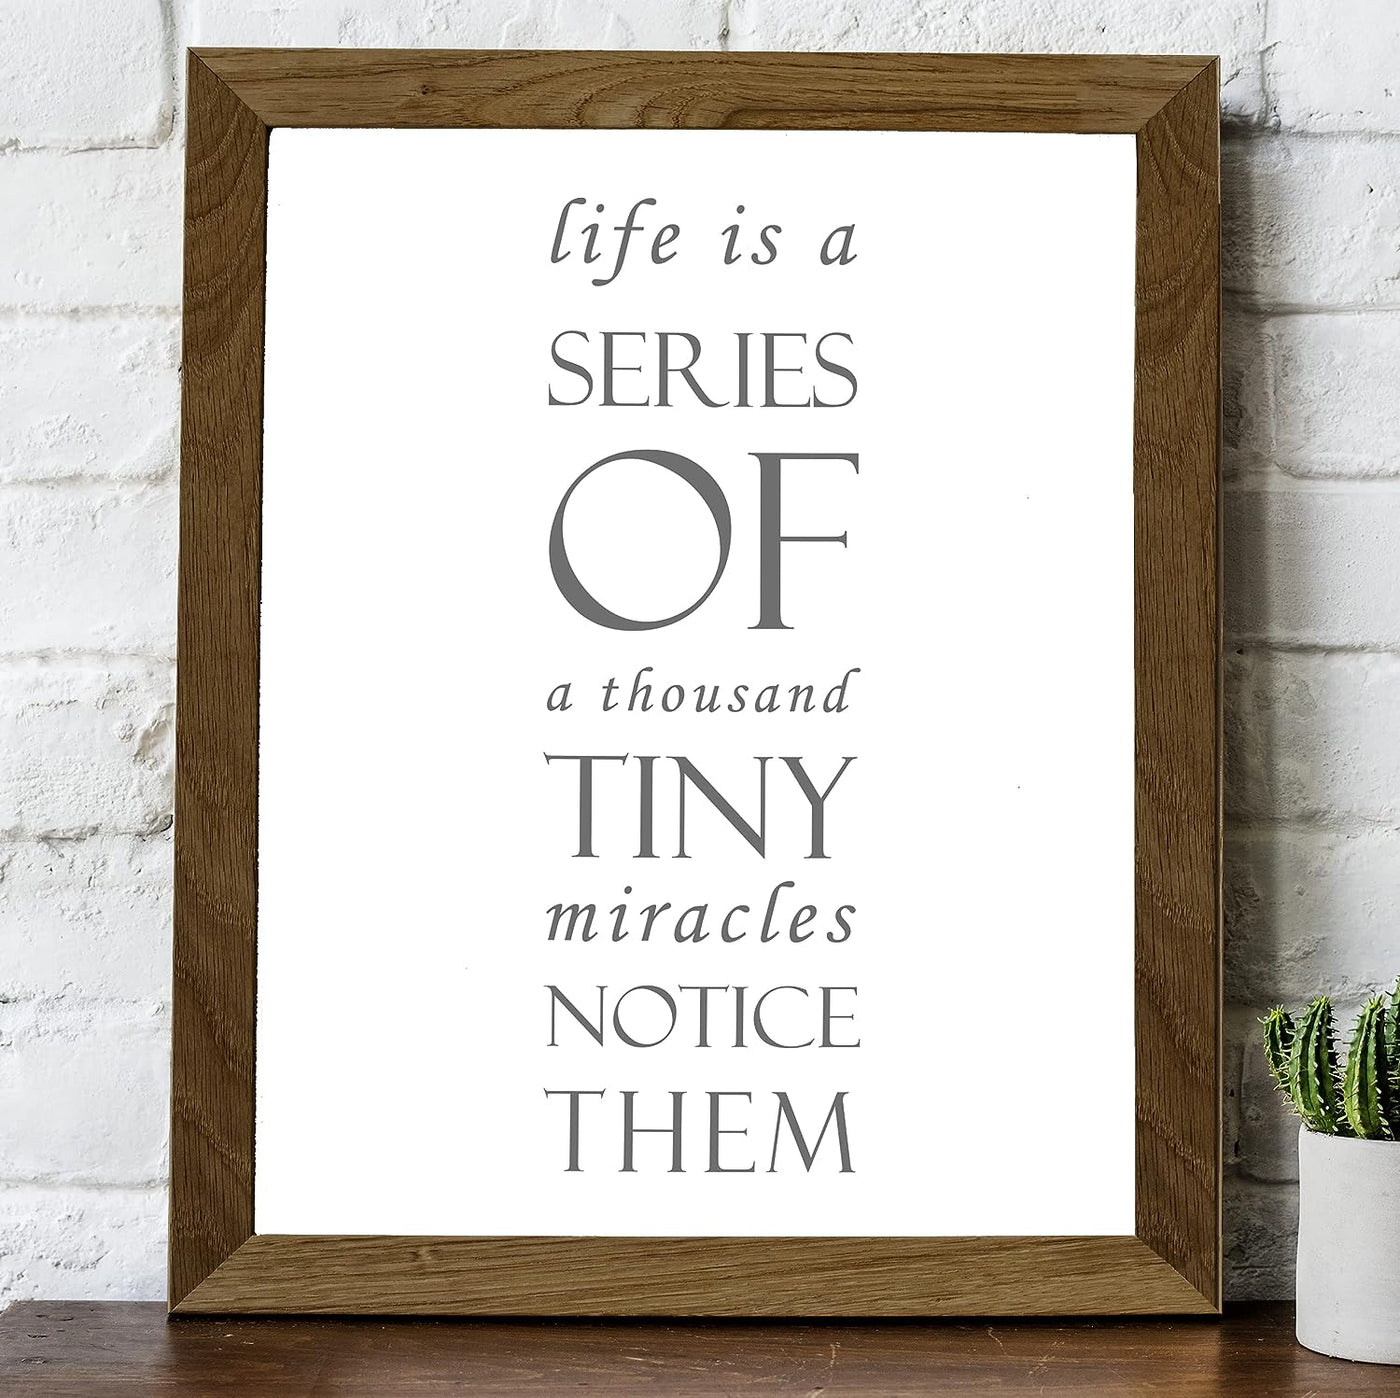 Life Is Series of Tiny Miracles-Notice Them Inspirational Wall Art Quote-8x10" Modern Farmhouse Decor Print-Ready to Frame. Motivational Home-Office-Desk-School Decor. Great Gift for Inspiration!